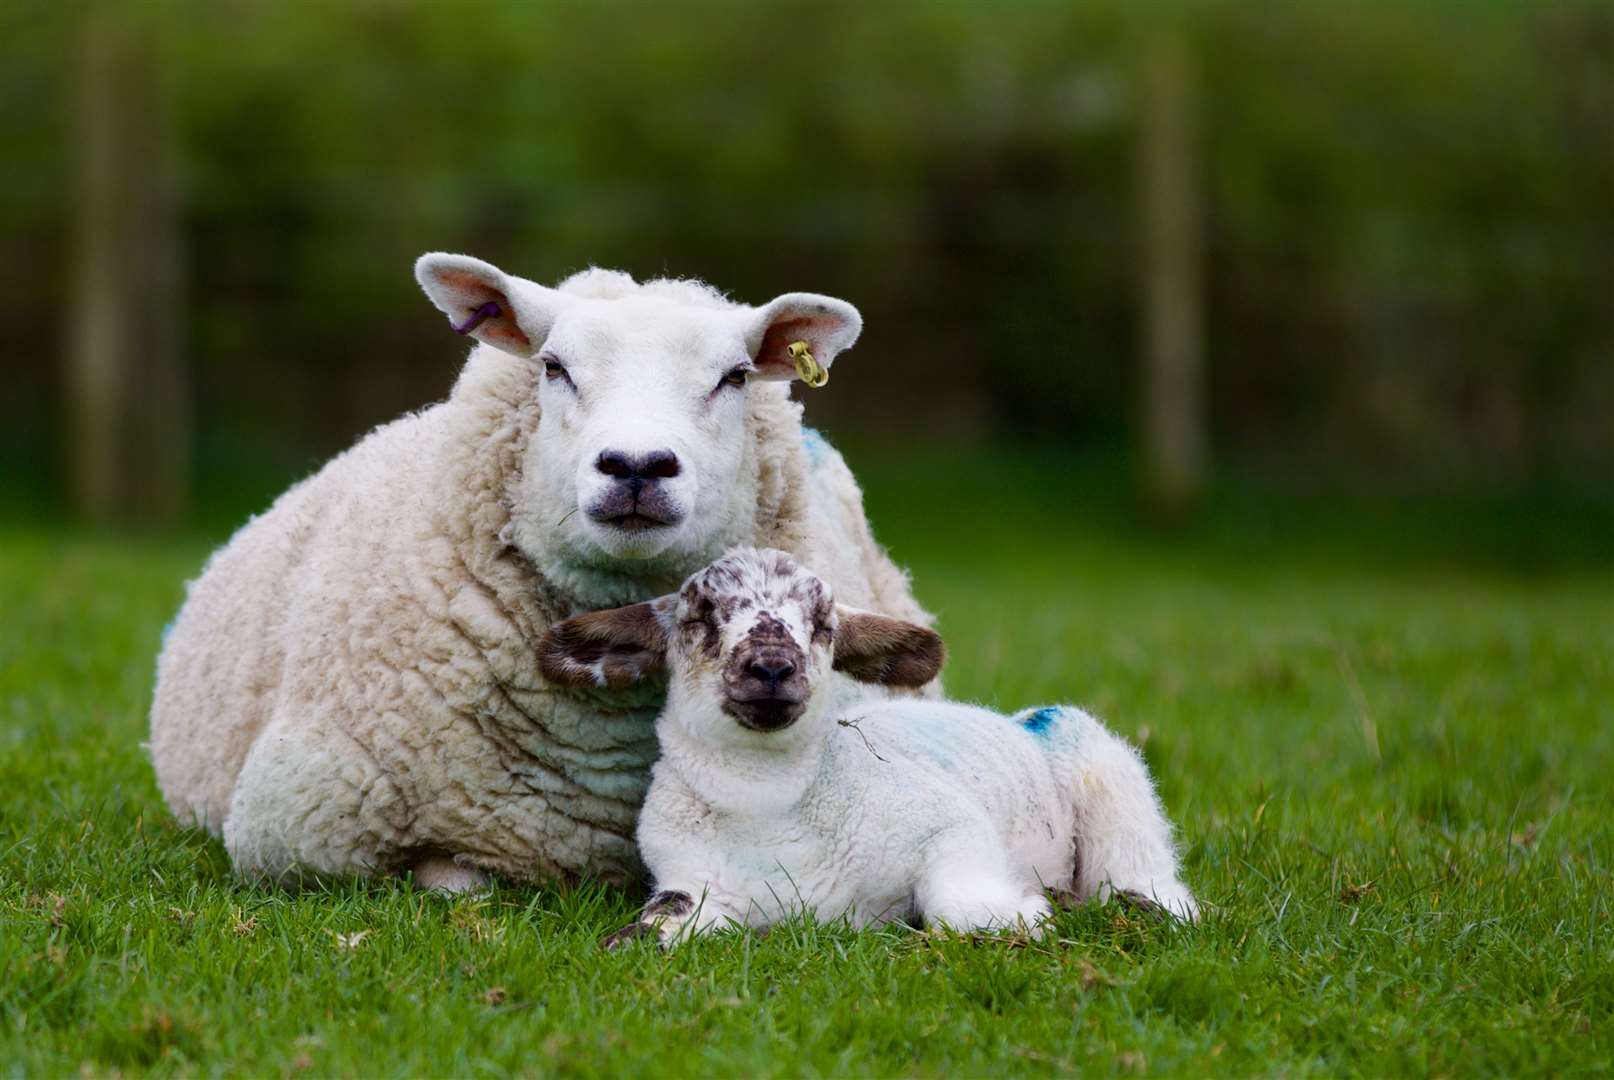 Many lambs are being put into fields for the first time. Image: iStock.